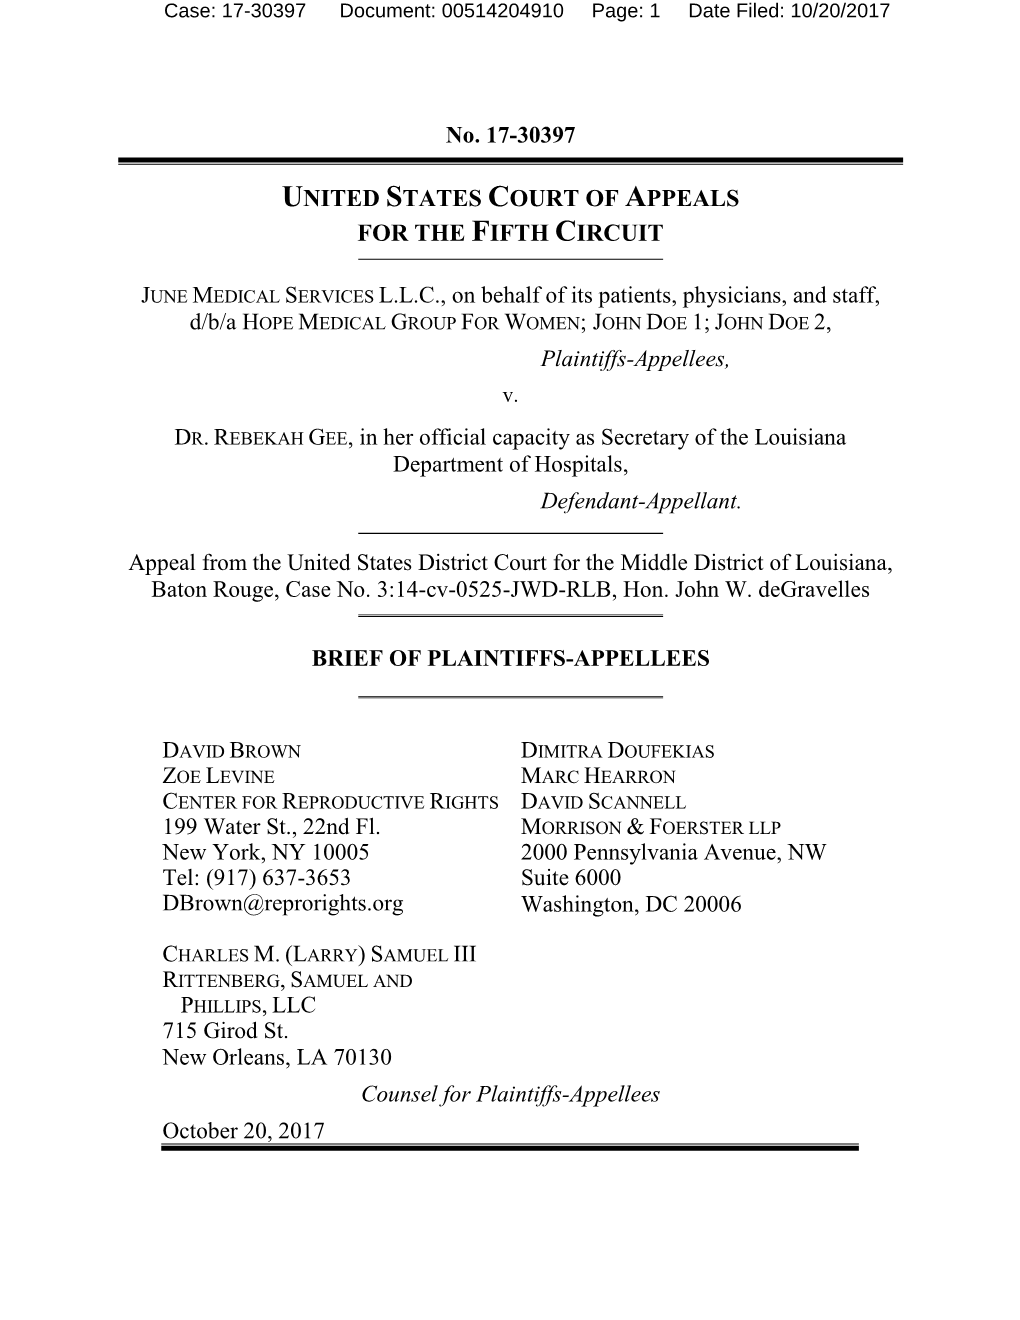 No. 17-30397 UNITED STATES COURT of APPEALS for THE